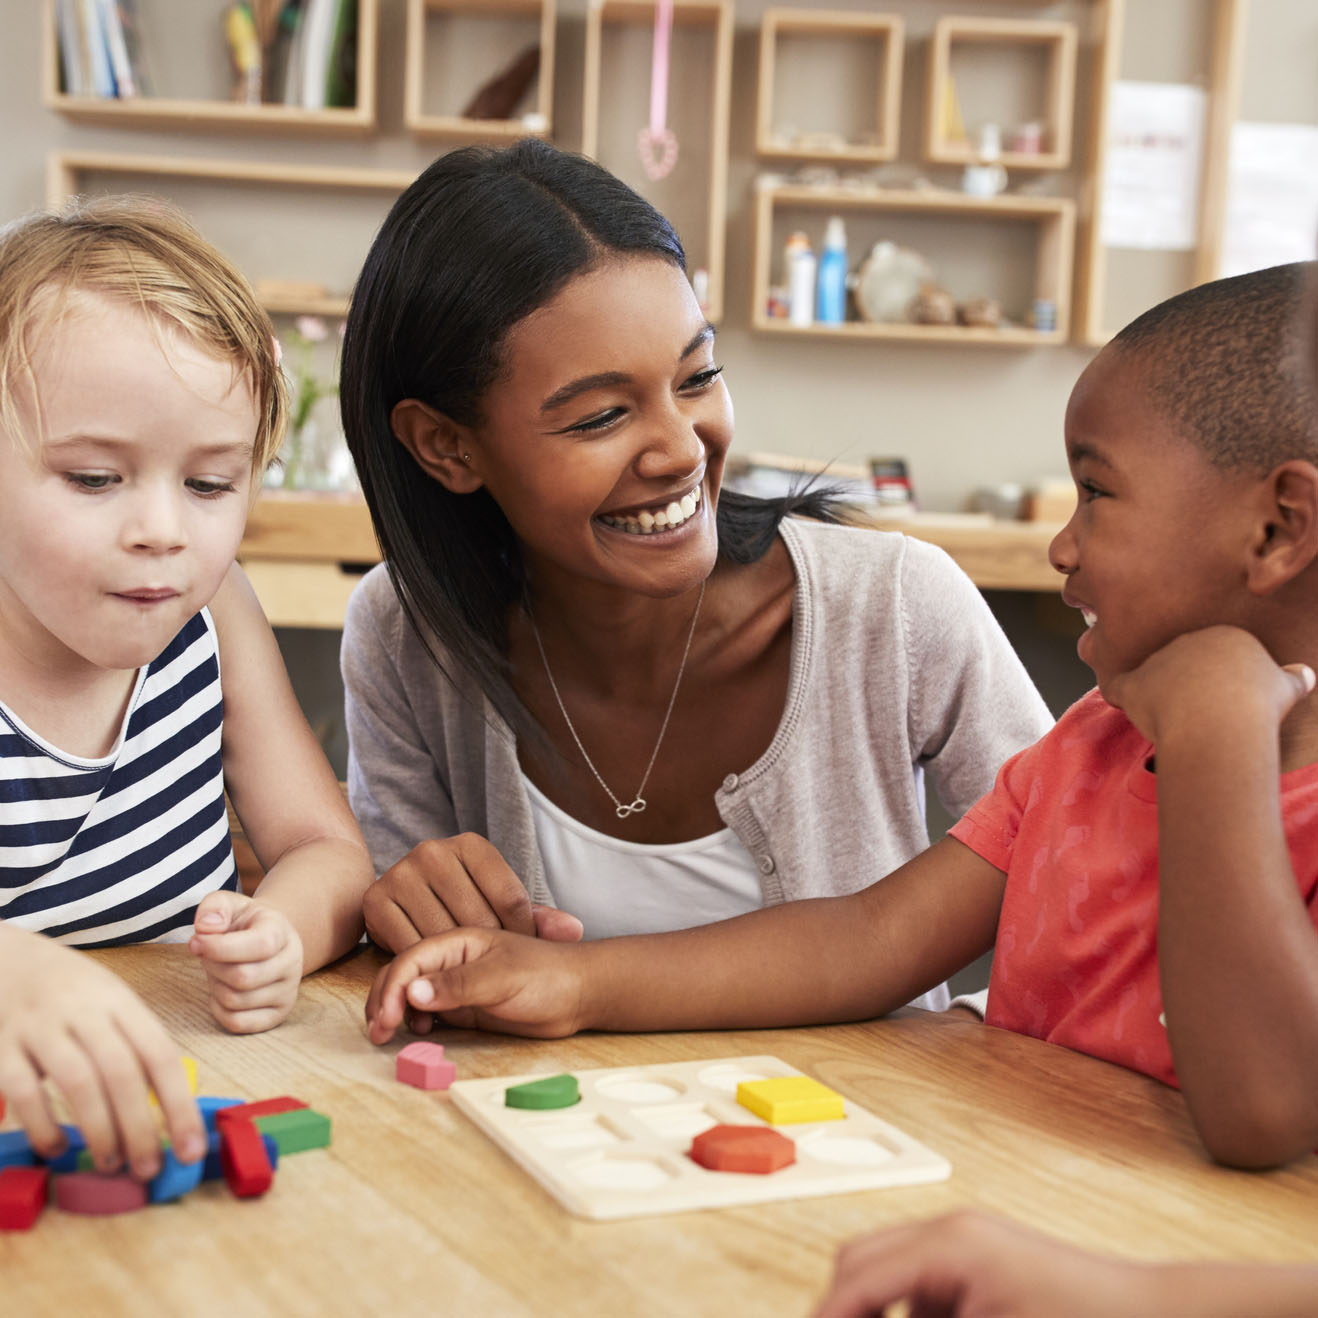 7 questions for child care providers by Children’s Learning Adventure. 